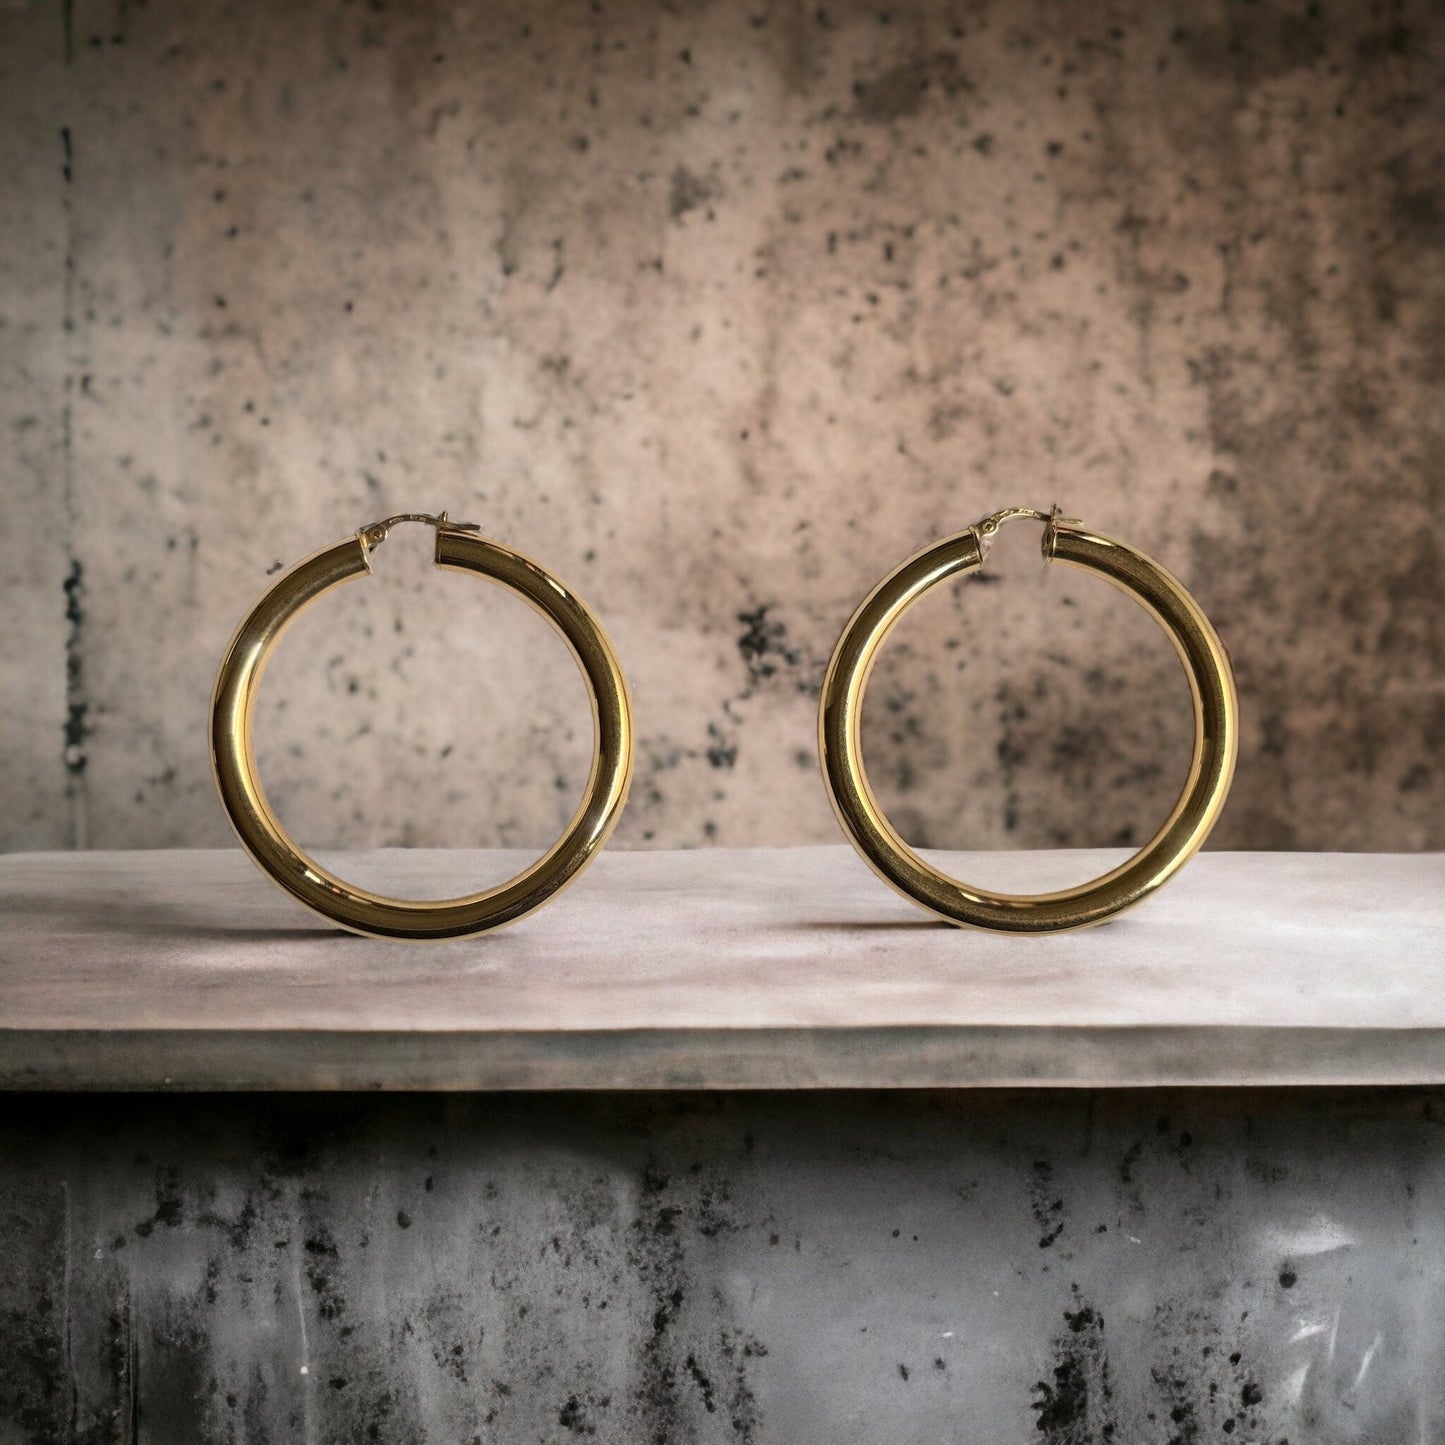 18k Solid Medium Round Gold Classic Hoop Earrings, Polished and Timeless Solid Gold Earrings